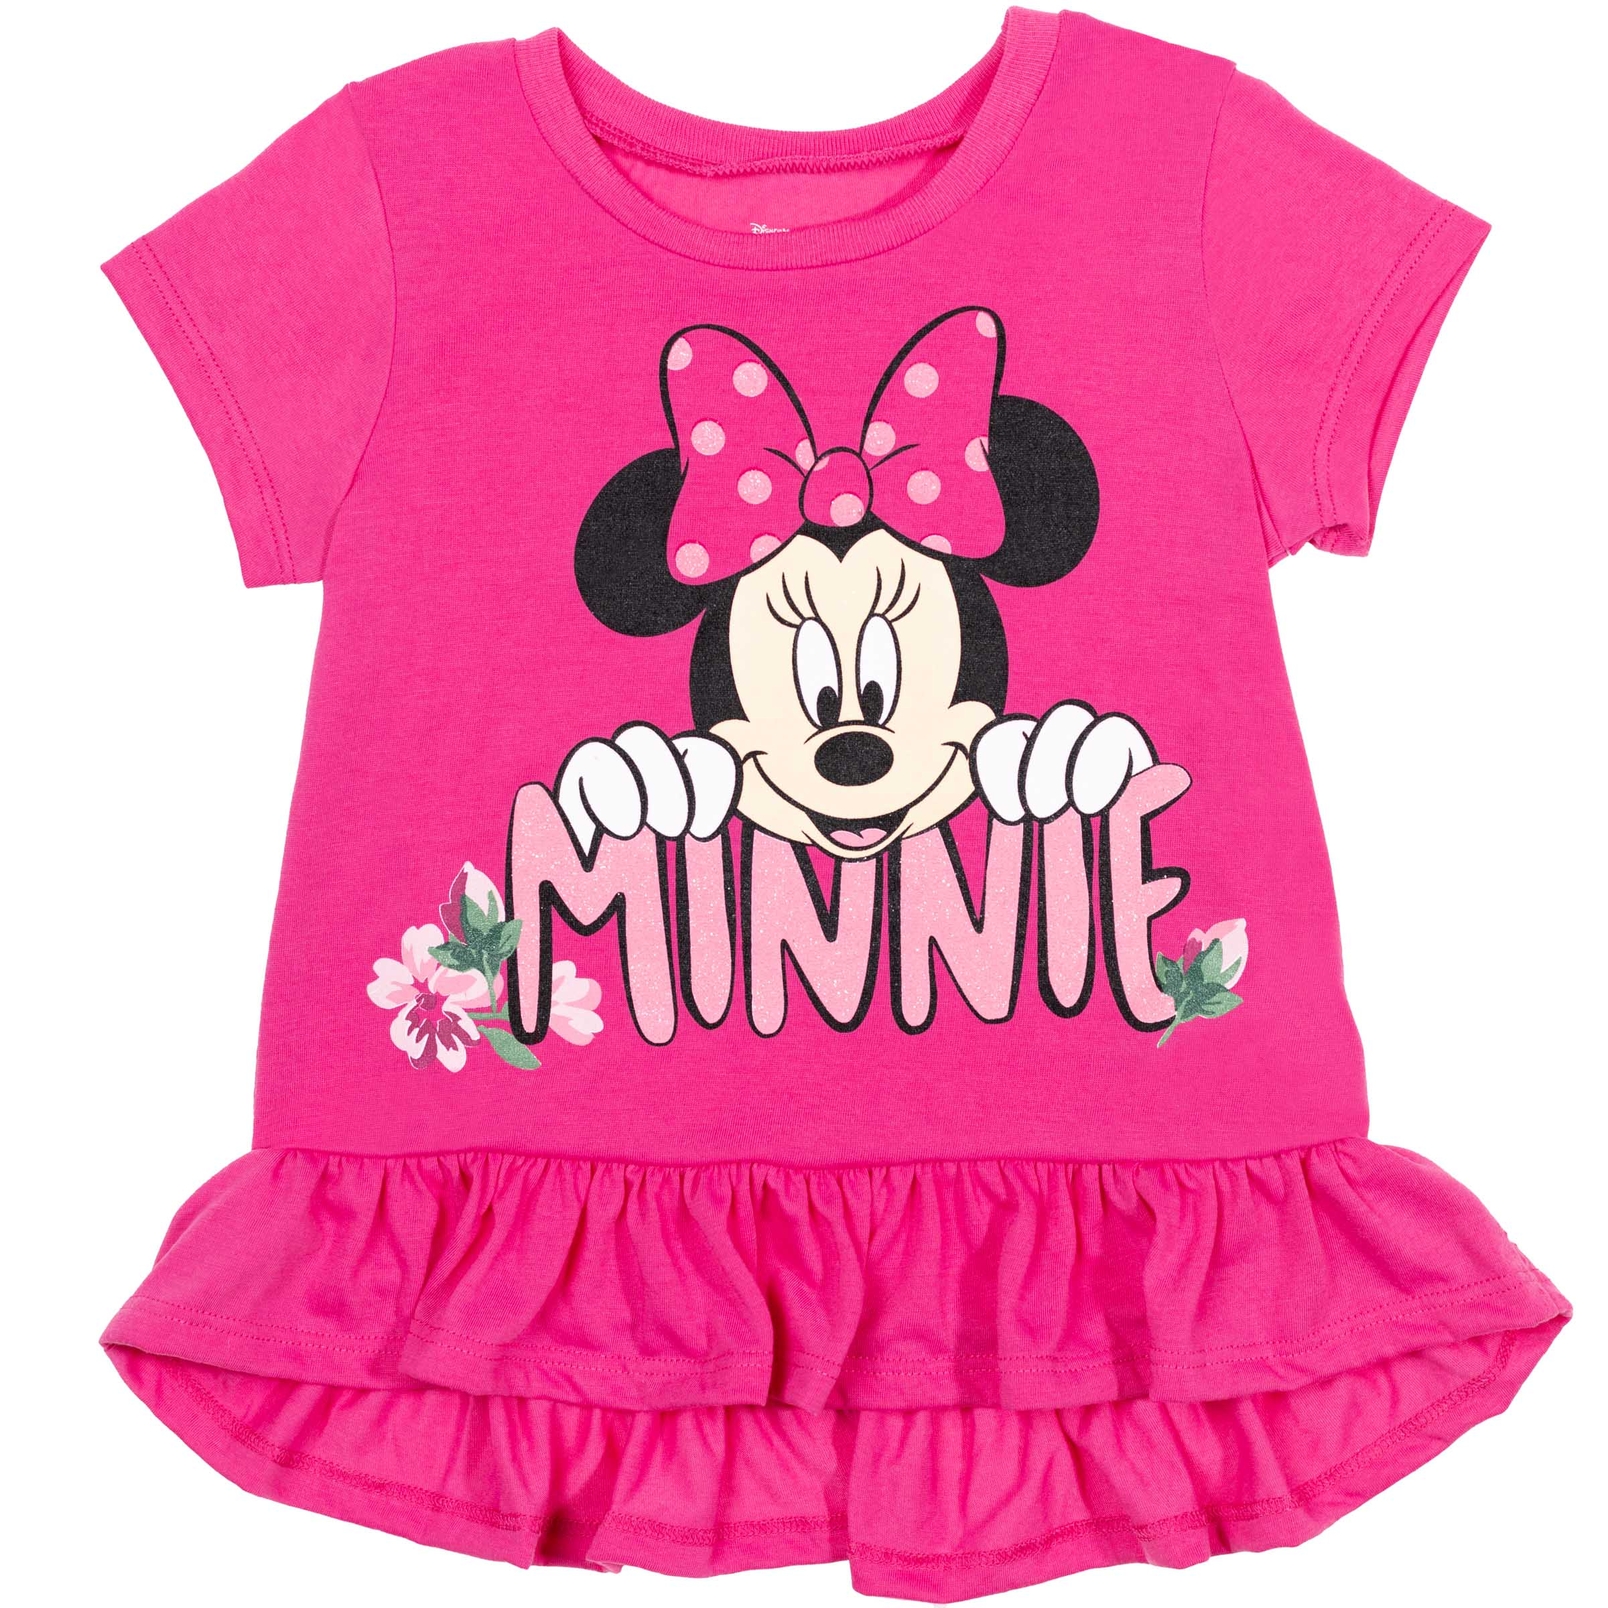 Disney Minnie Mouse Toddler Girls Peplum T-Shirt Bike Shorts and Scrunchie 3 Piece Outfit Set Infant to Big Kid - image 2 of 5